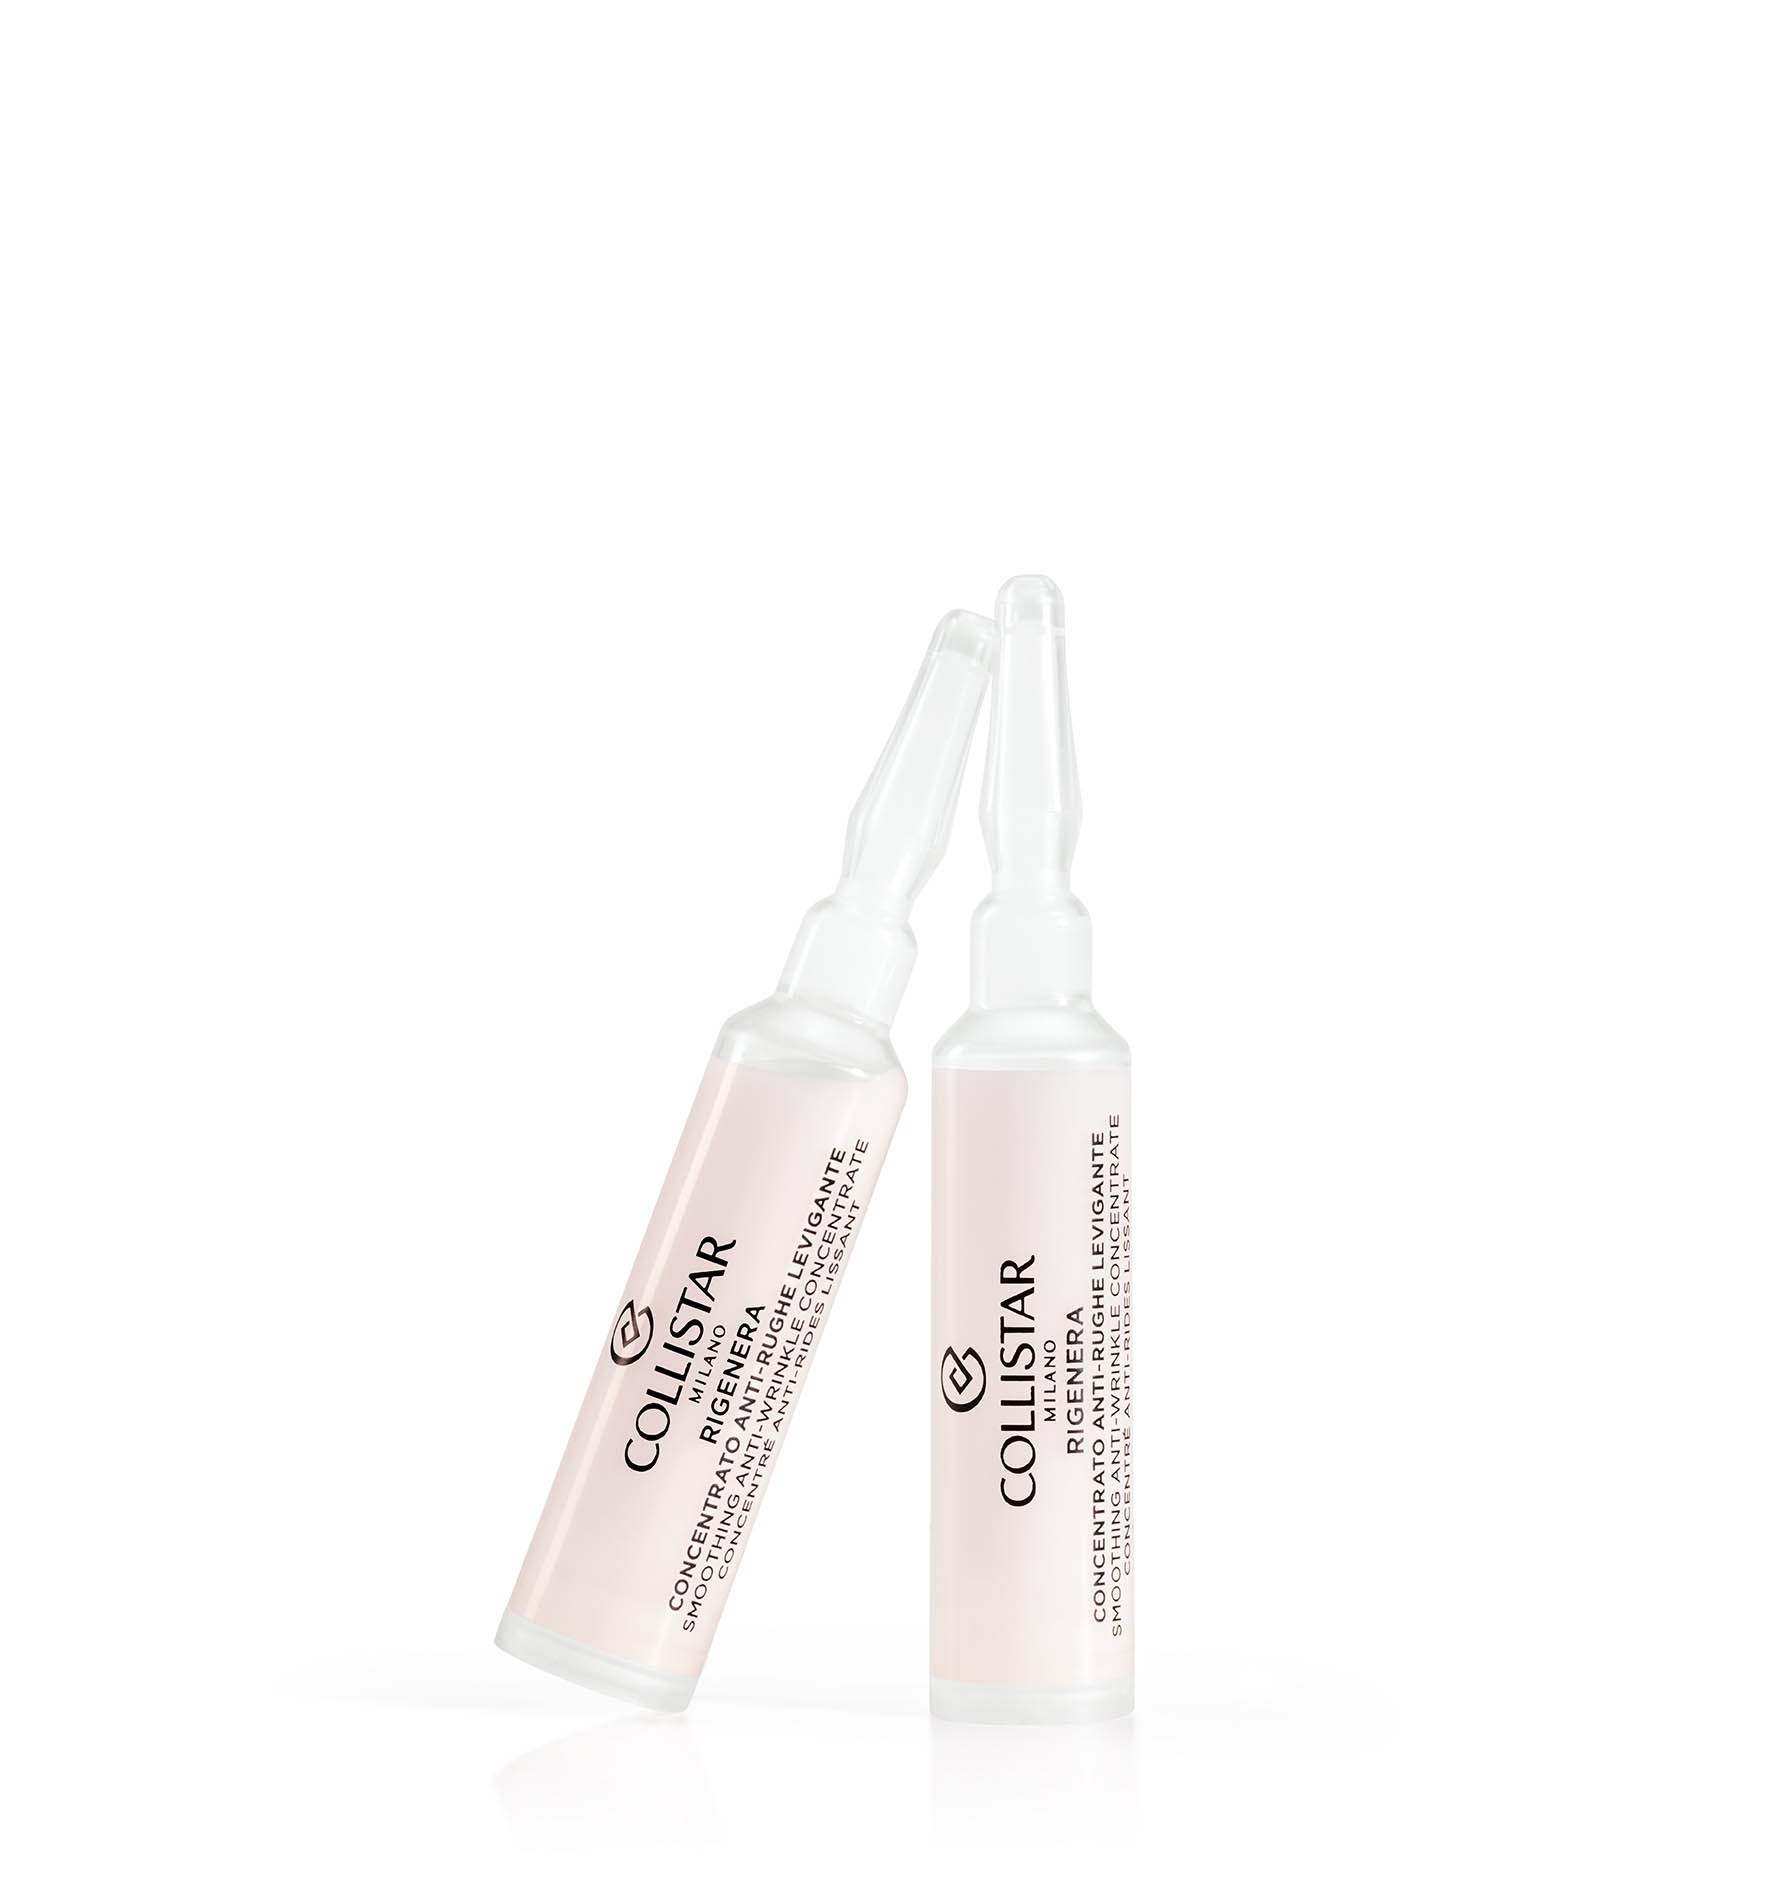 RIGENERA SMOOTHING ANTI-WRINKLE CONCENTRATE - NIEUW | Collistar - Shop Online Ufficiale